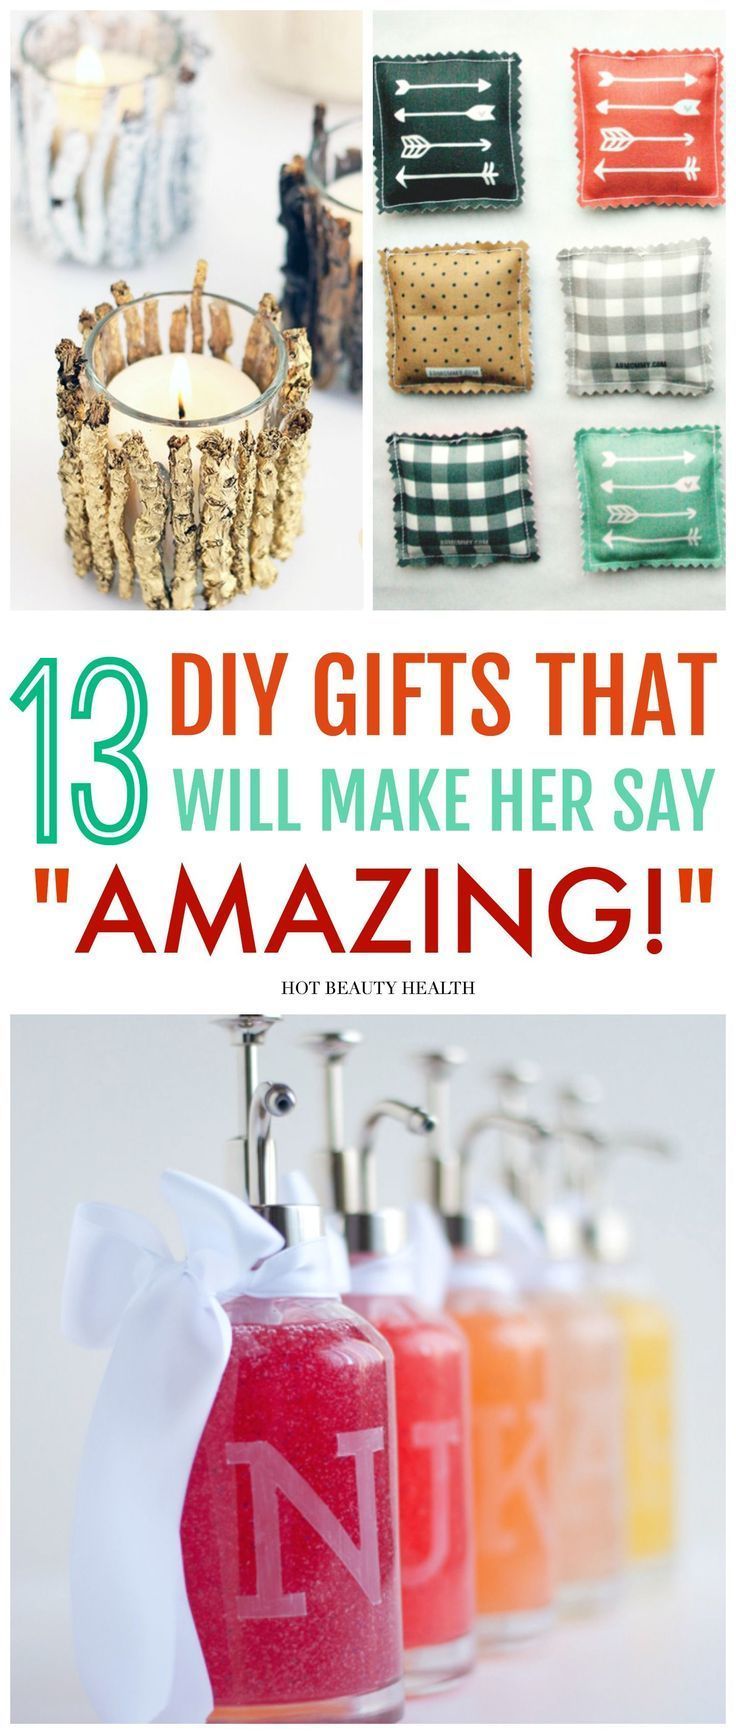 13 Amazing DIY Christmas Gift Ideas People Actually Want -   18 diy projects For Gifts creative ideas